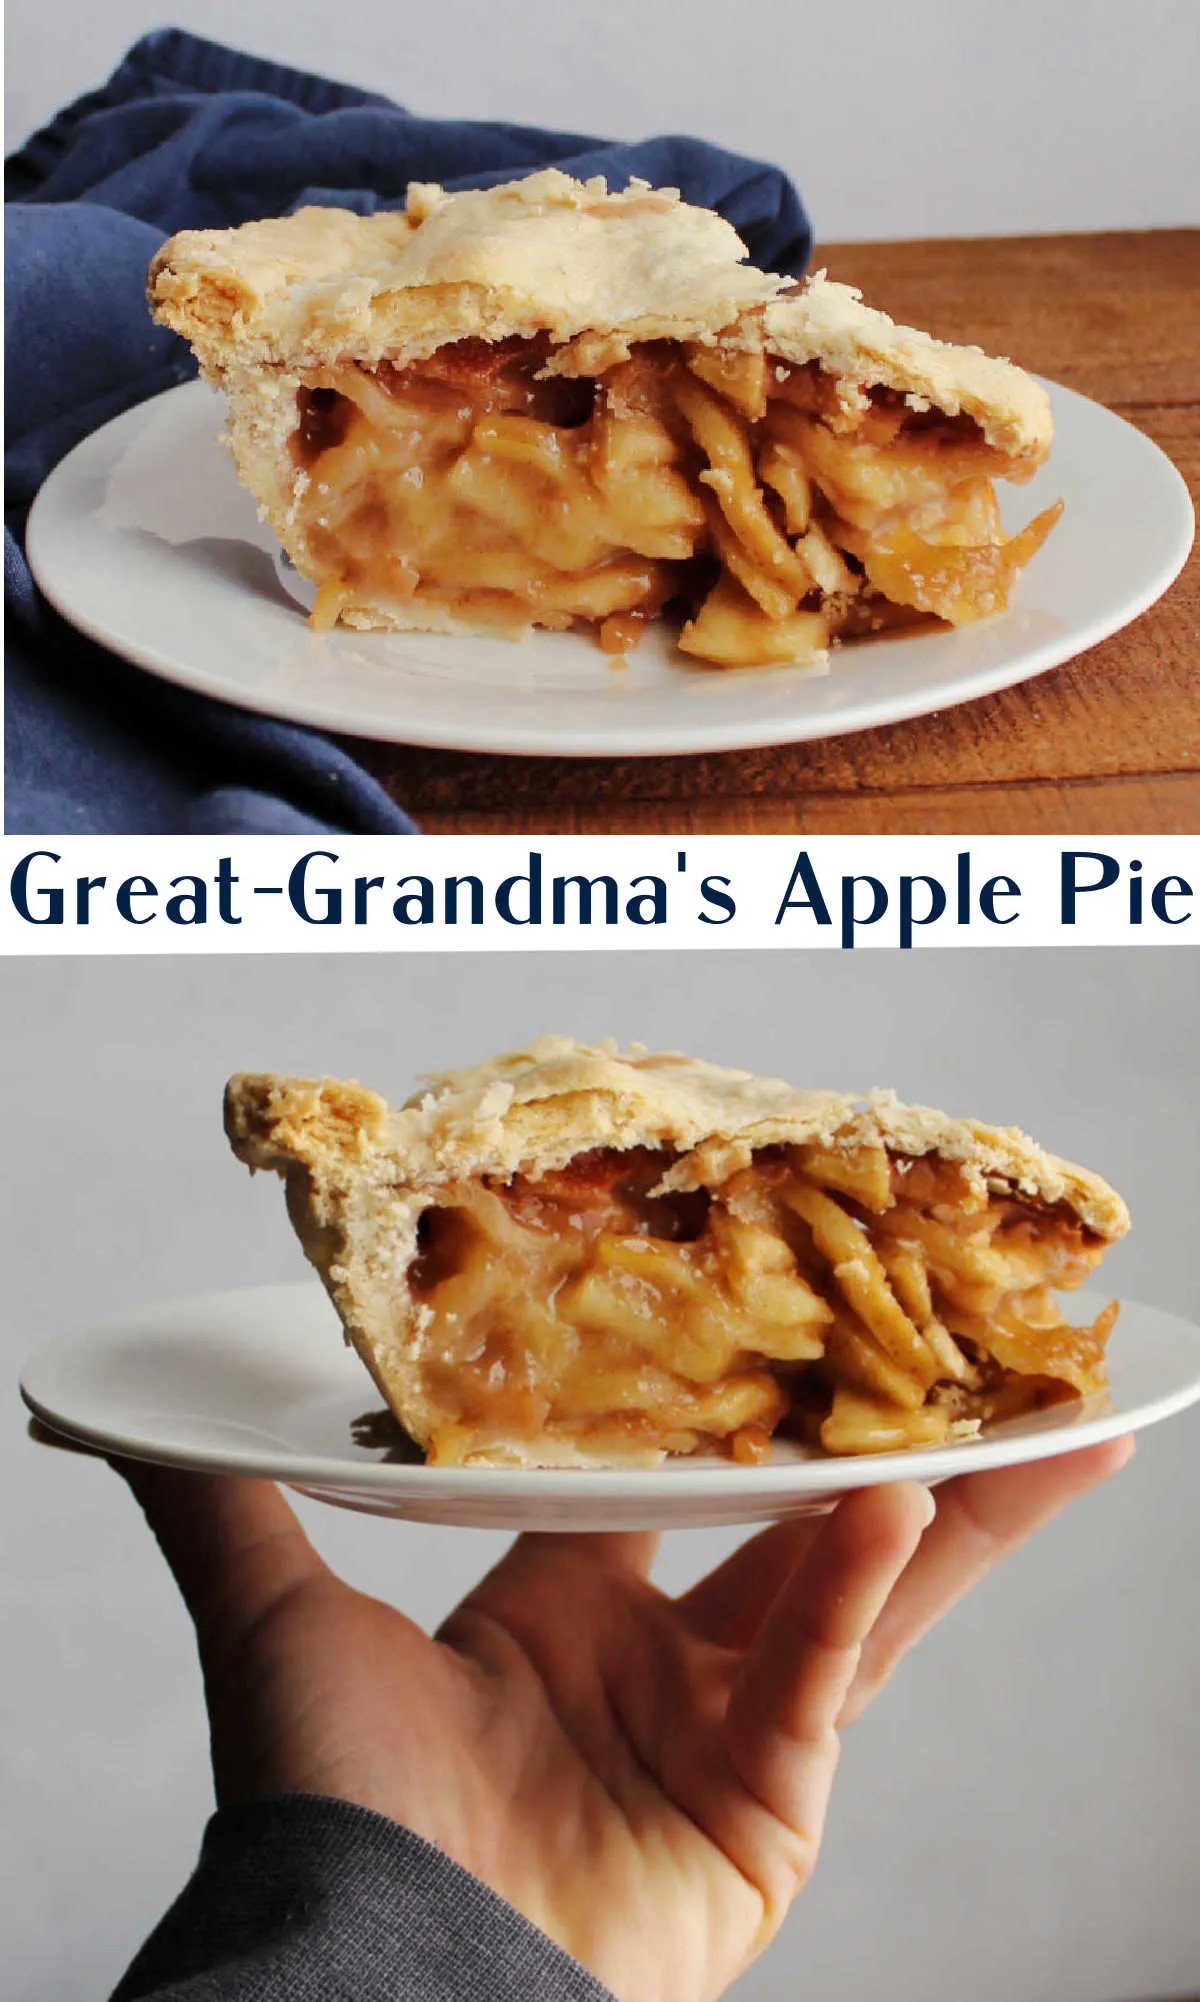 It is hard to beat a good apple pie. There is something so simple but so good about a great pie. That apple cinnamon filling is a classic for good reason. Now you can bake right from my great-grandmother's recipe to make the best possible pie.